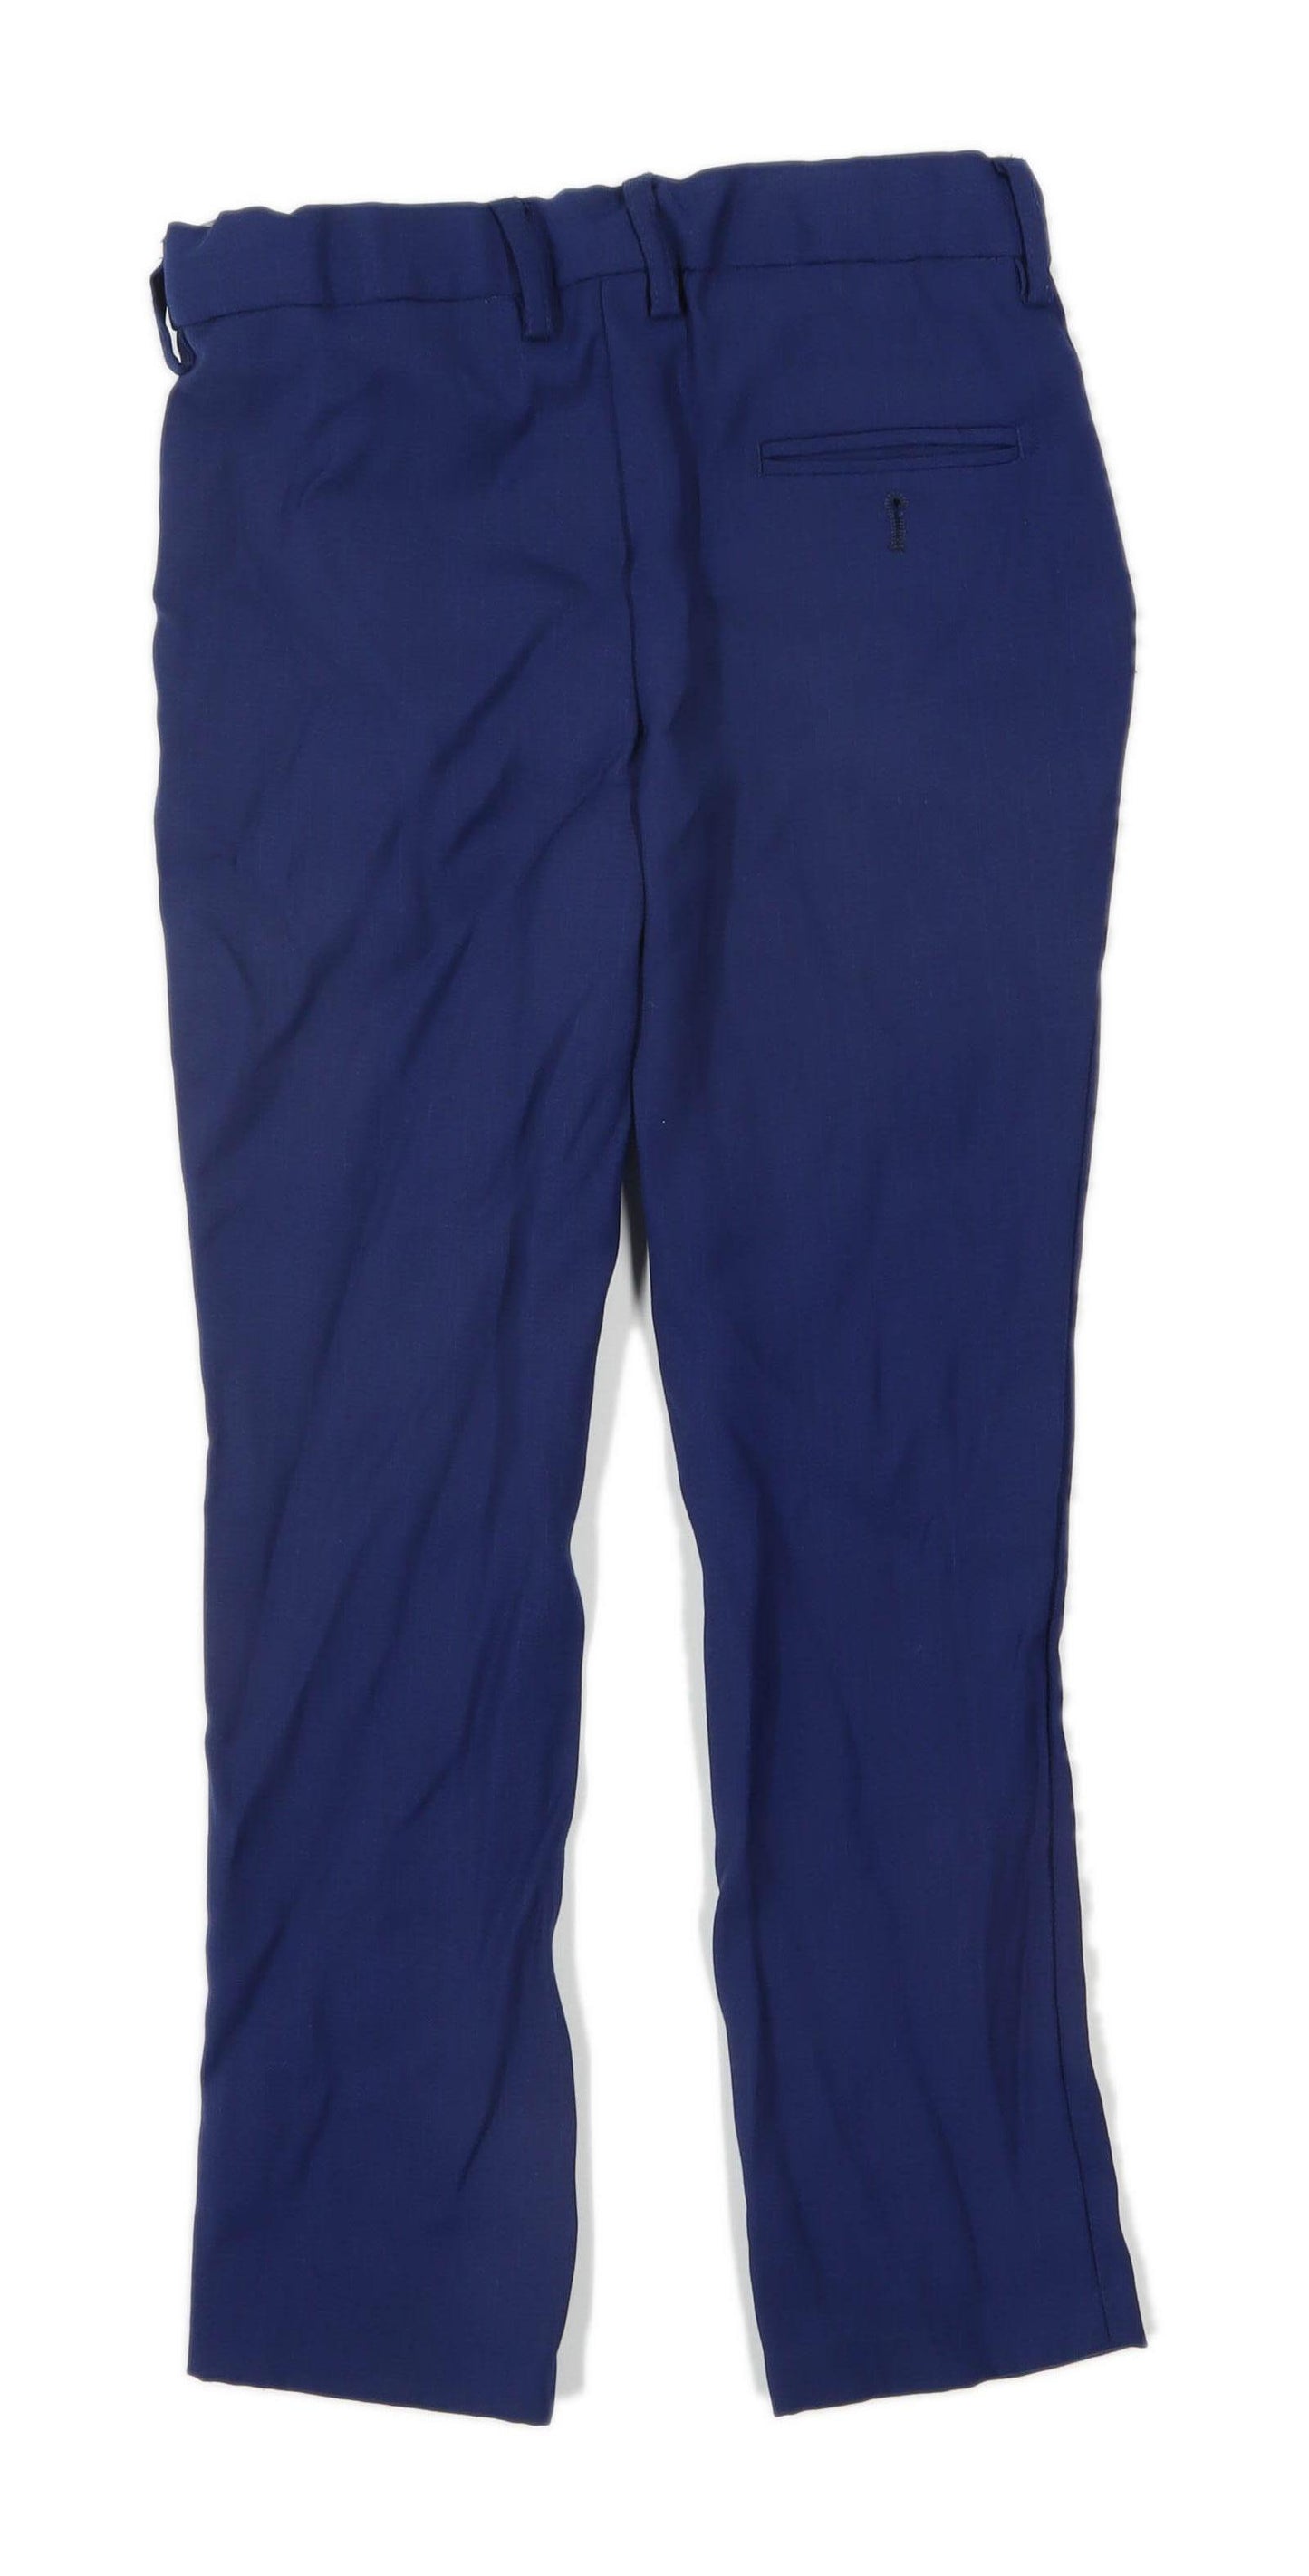 Paisley Boys Blue Trousers Age 8 Years